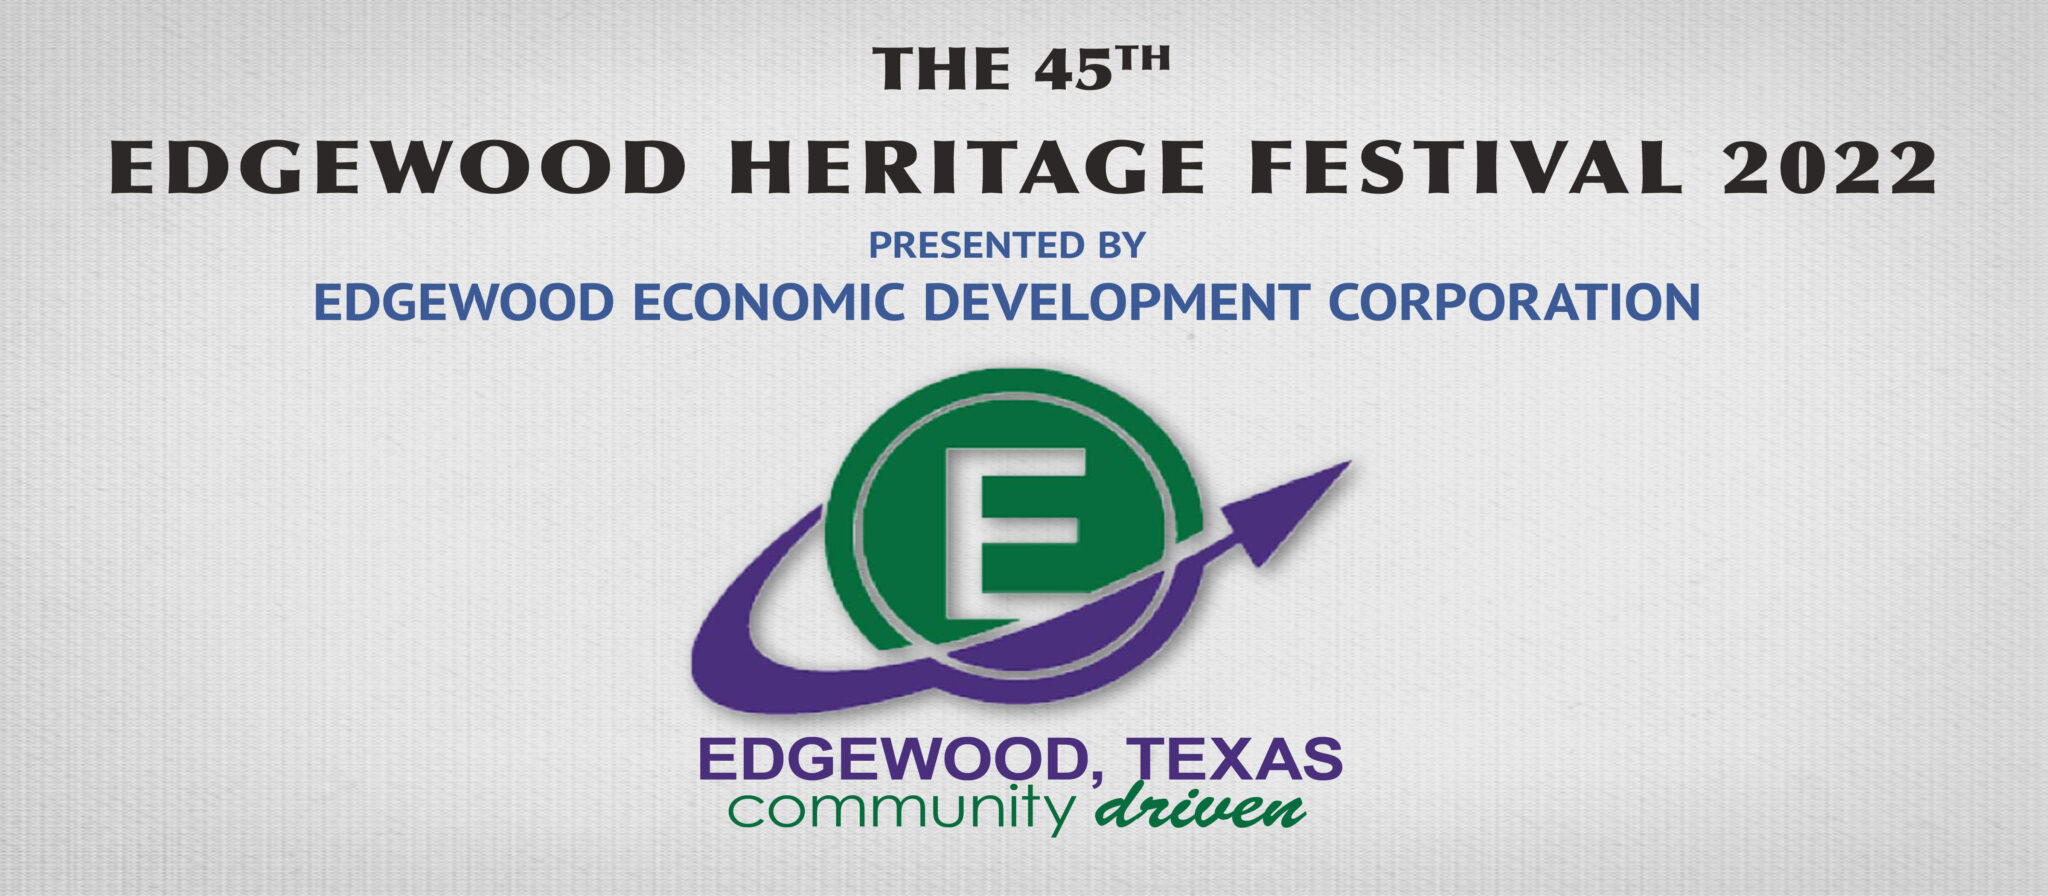 Edgewood Heritage Festival Preserving the past for the future